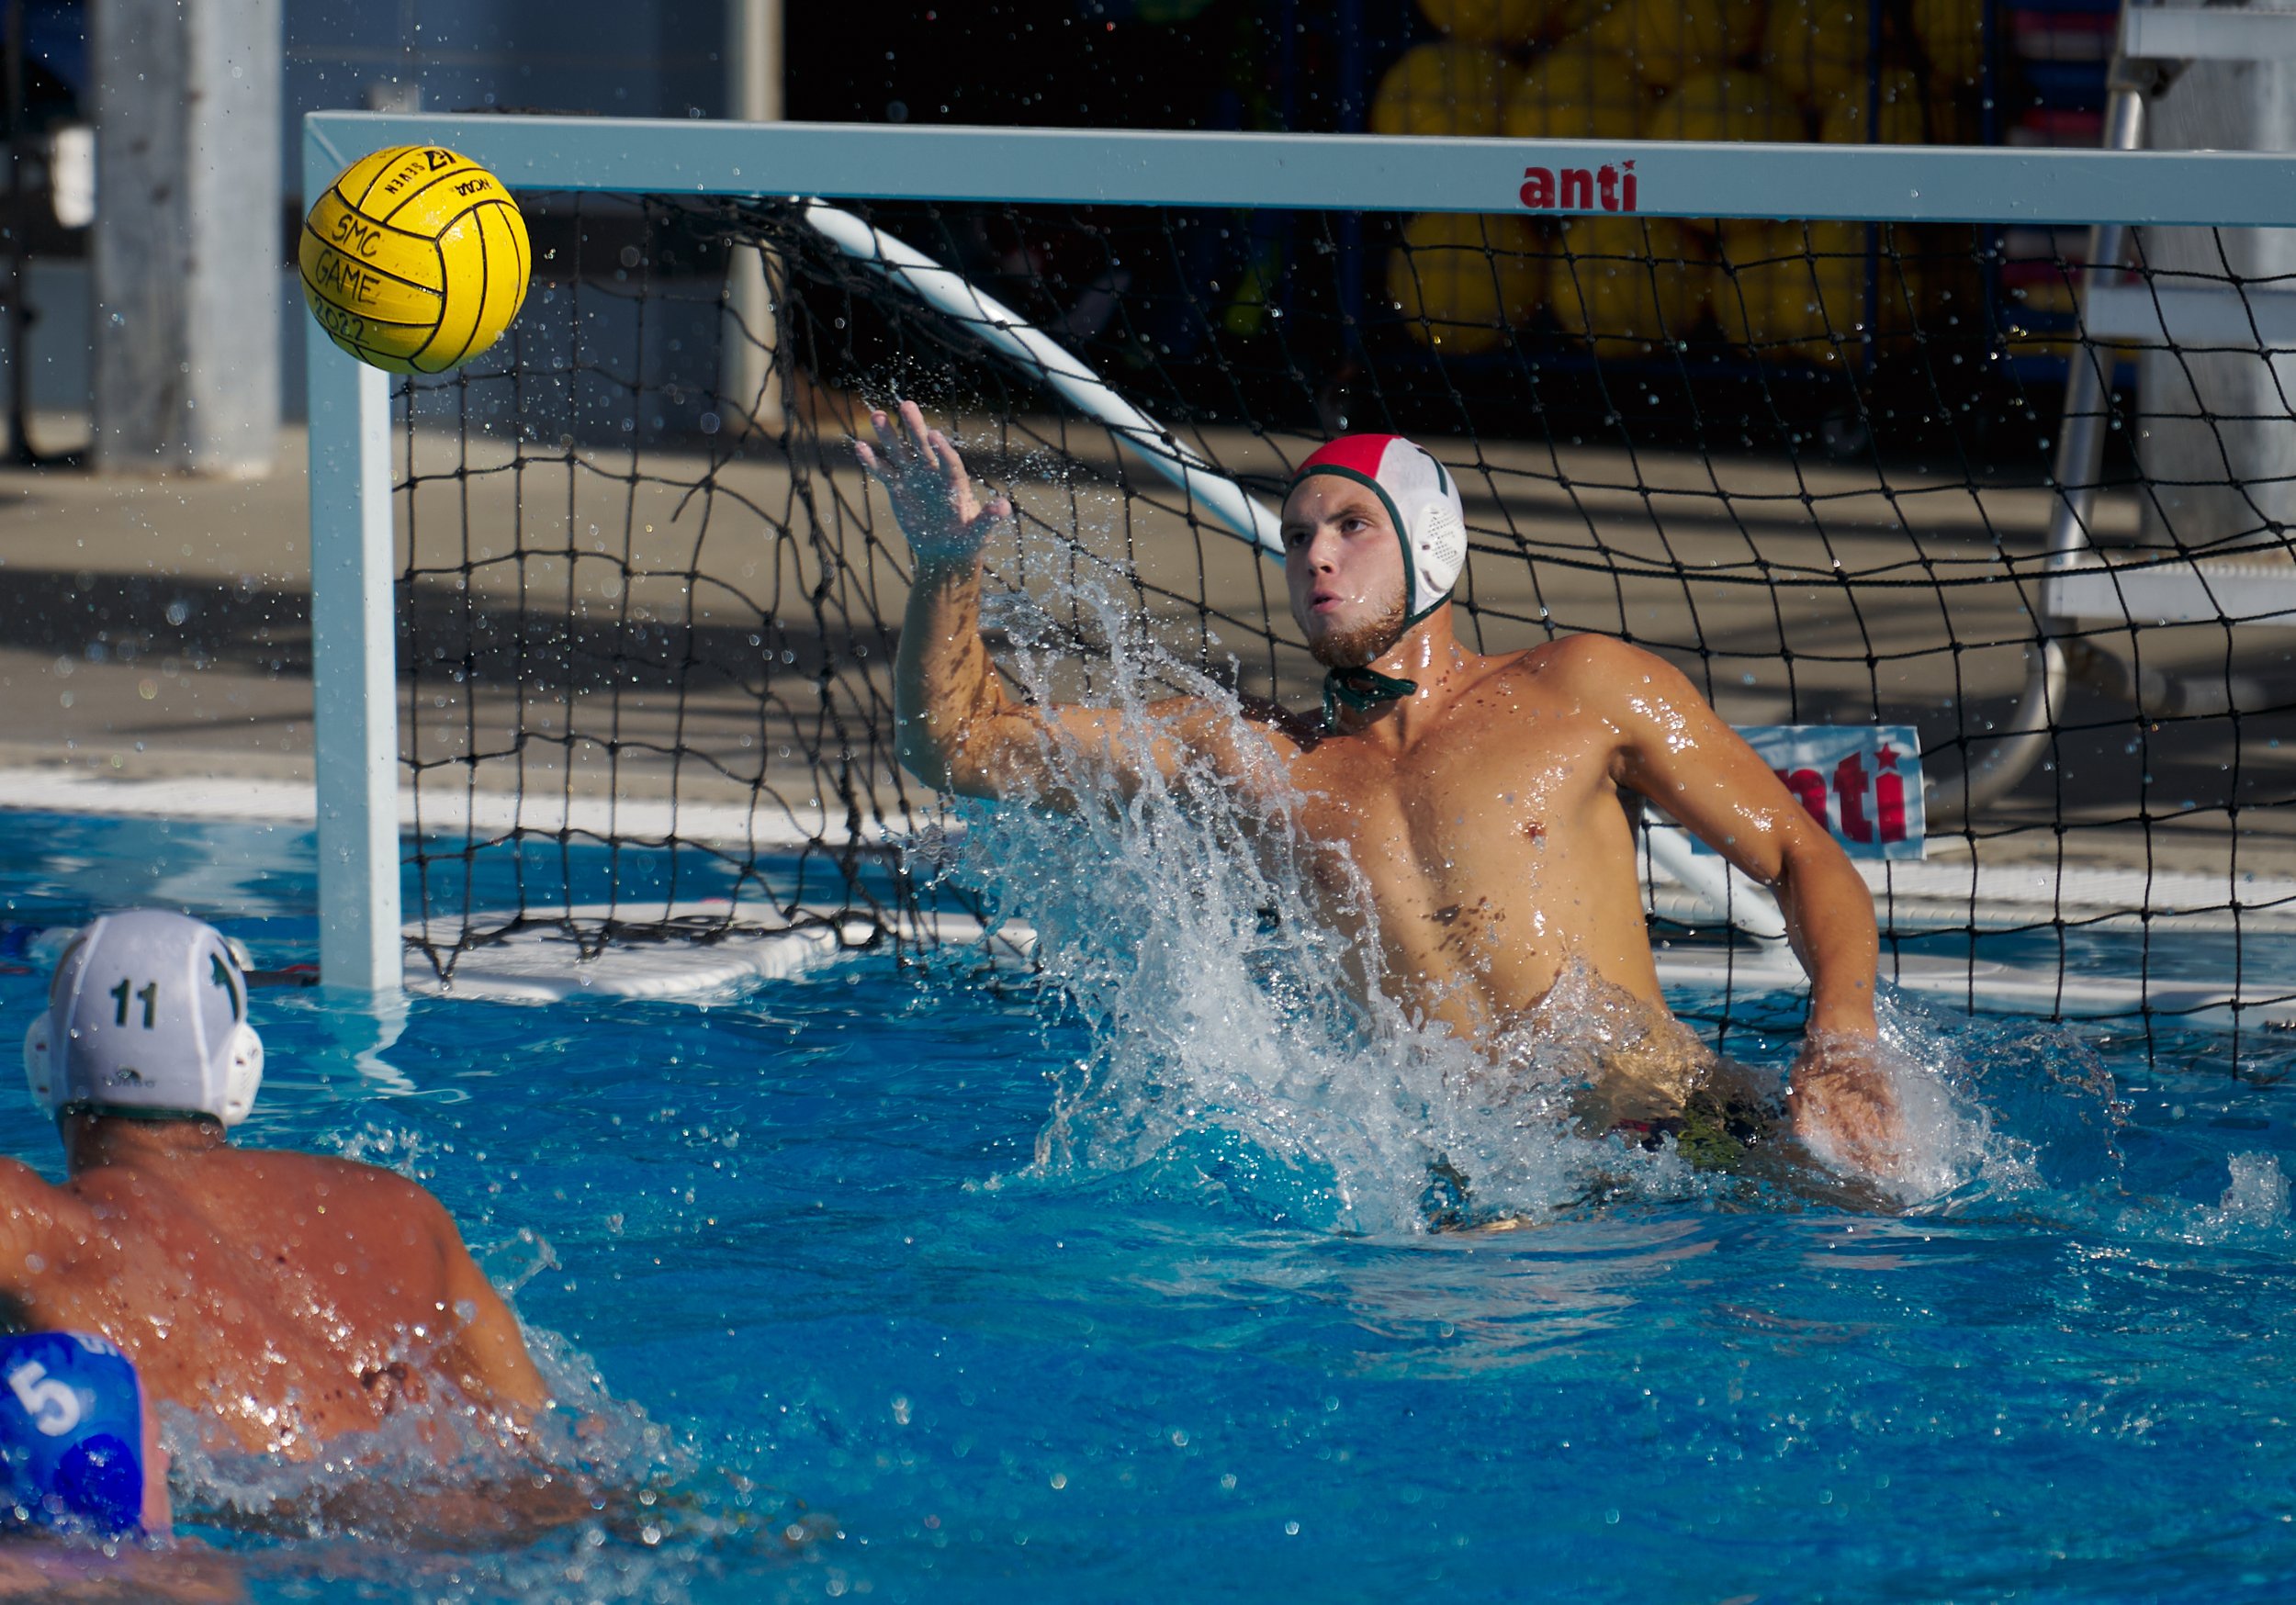  Los Angeles Valley College Monarchs Men's Water Polo Goalie, Daniel Smkovsky, blocks the ball during the men's water polo match on Wednesday, Sept. 28, 2022, at the Santa Monica College Aquatics Center in Santa Monica, Calif. The Corsairs lost 23-4.